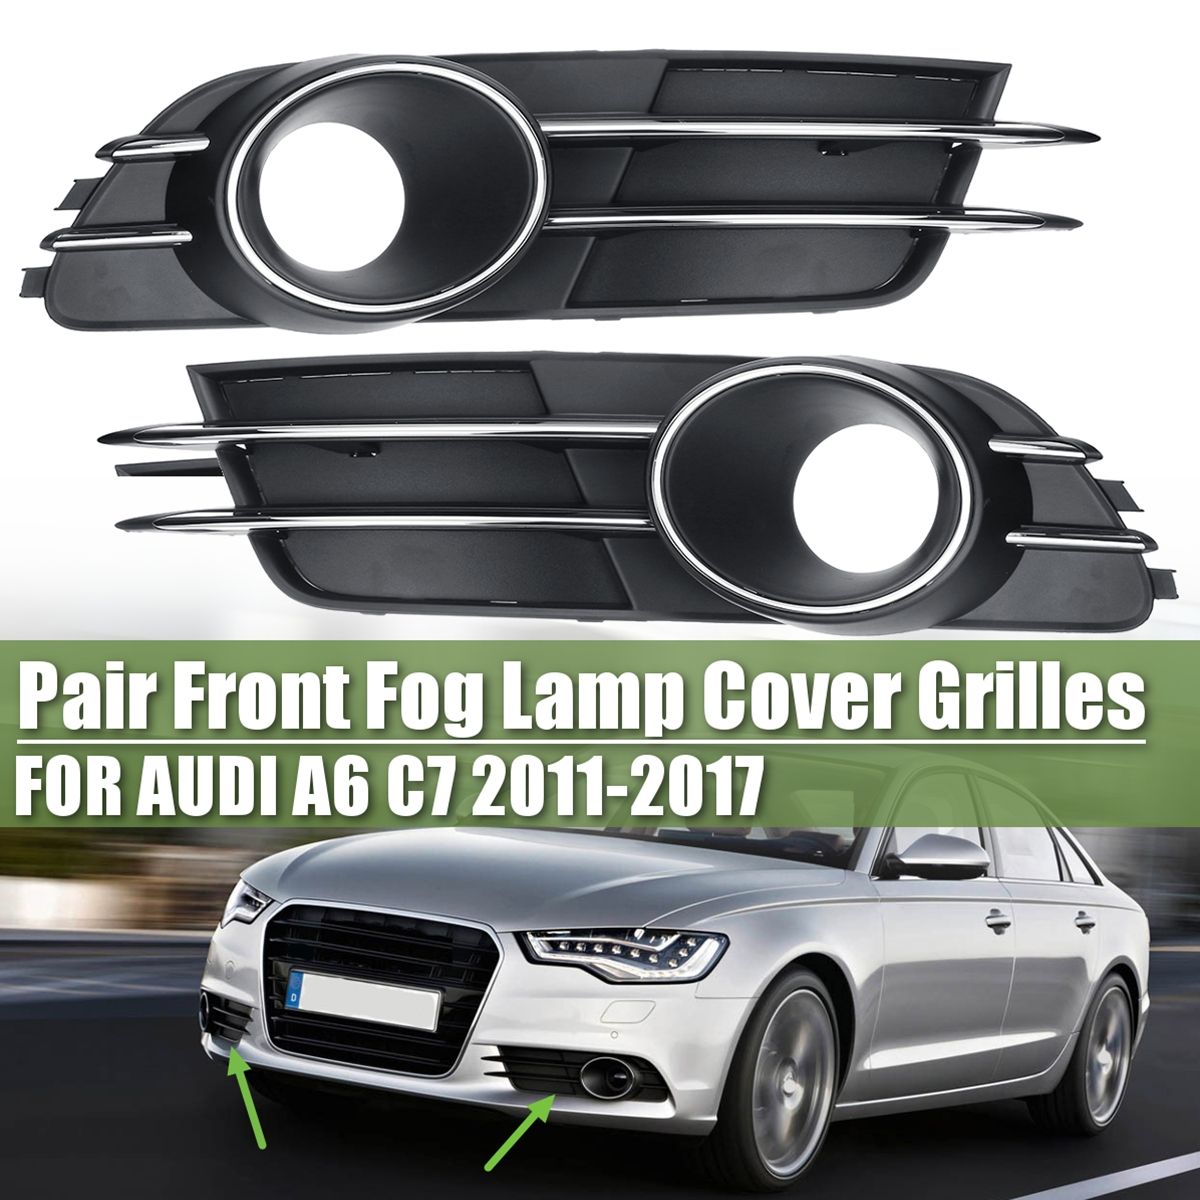 Front-Lower-Bumper-Fog-Light-Grille-Lamp-Cover-Vent-Pair-for-AUDI-A6-C7-2011-2017-1425200